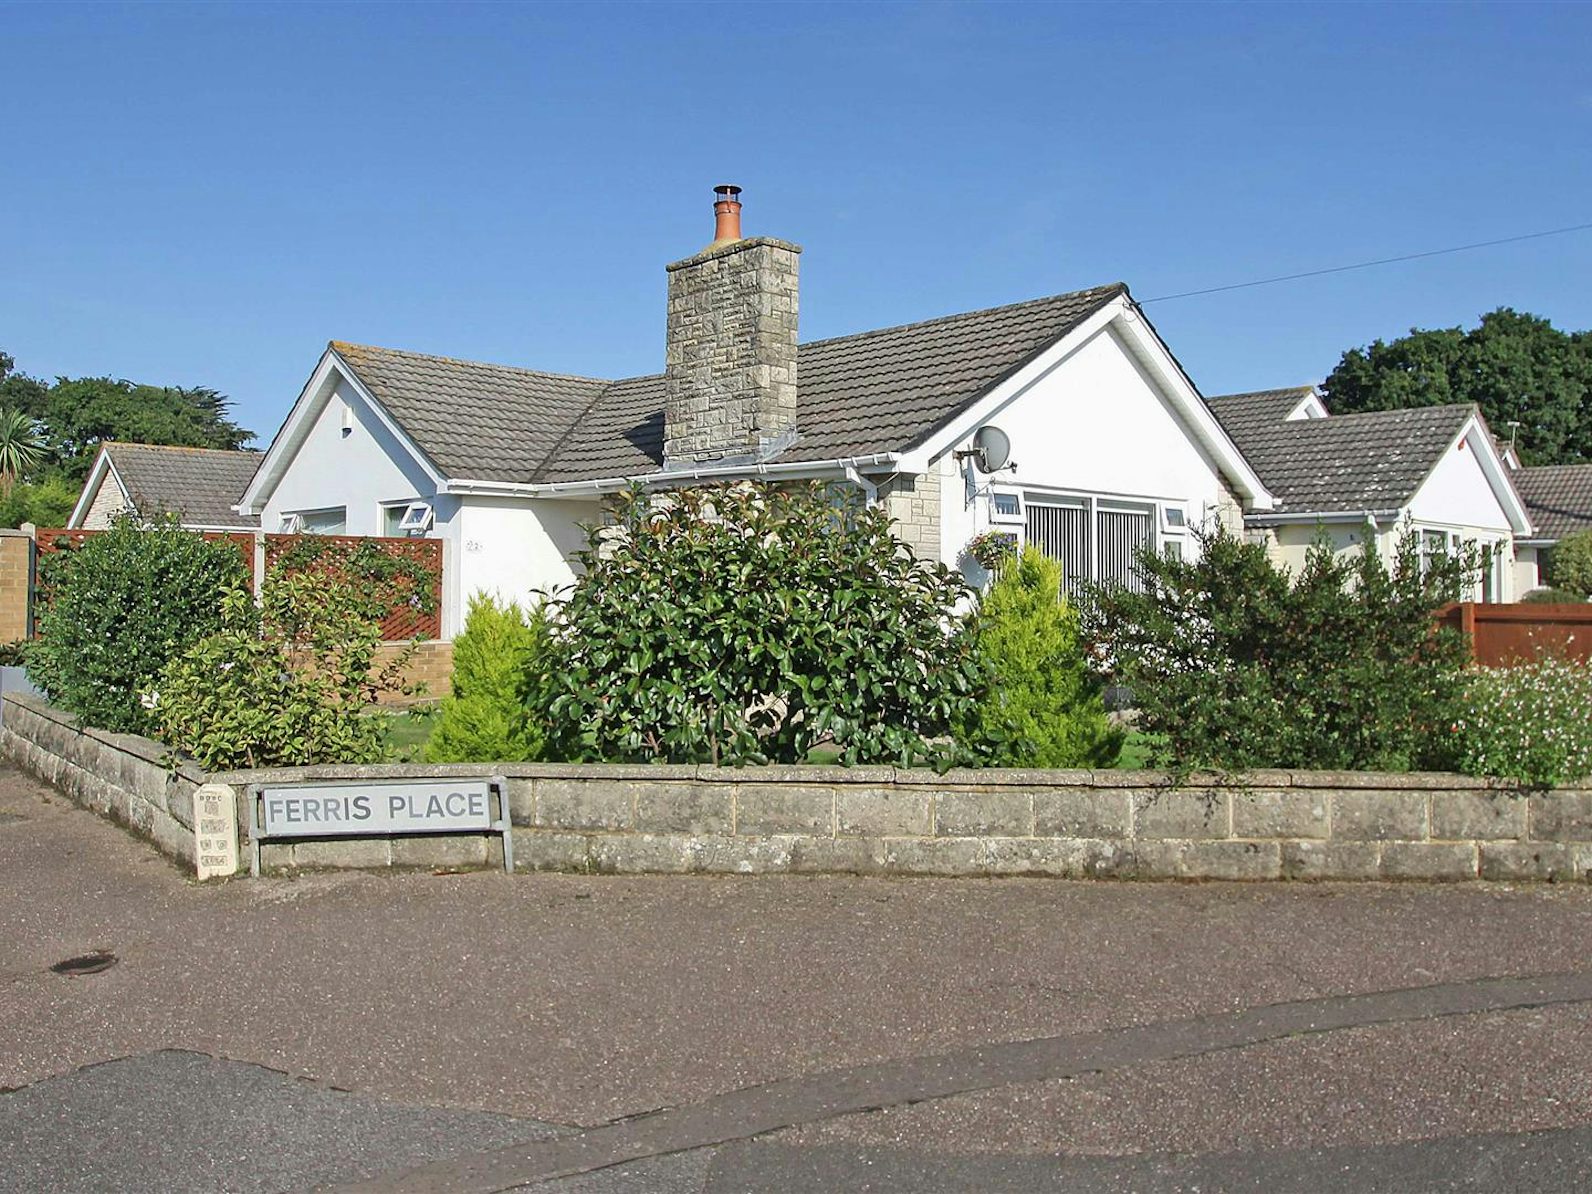 Detached bungalow for sale on Ferris Place Bournemouth, BH8